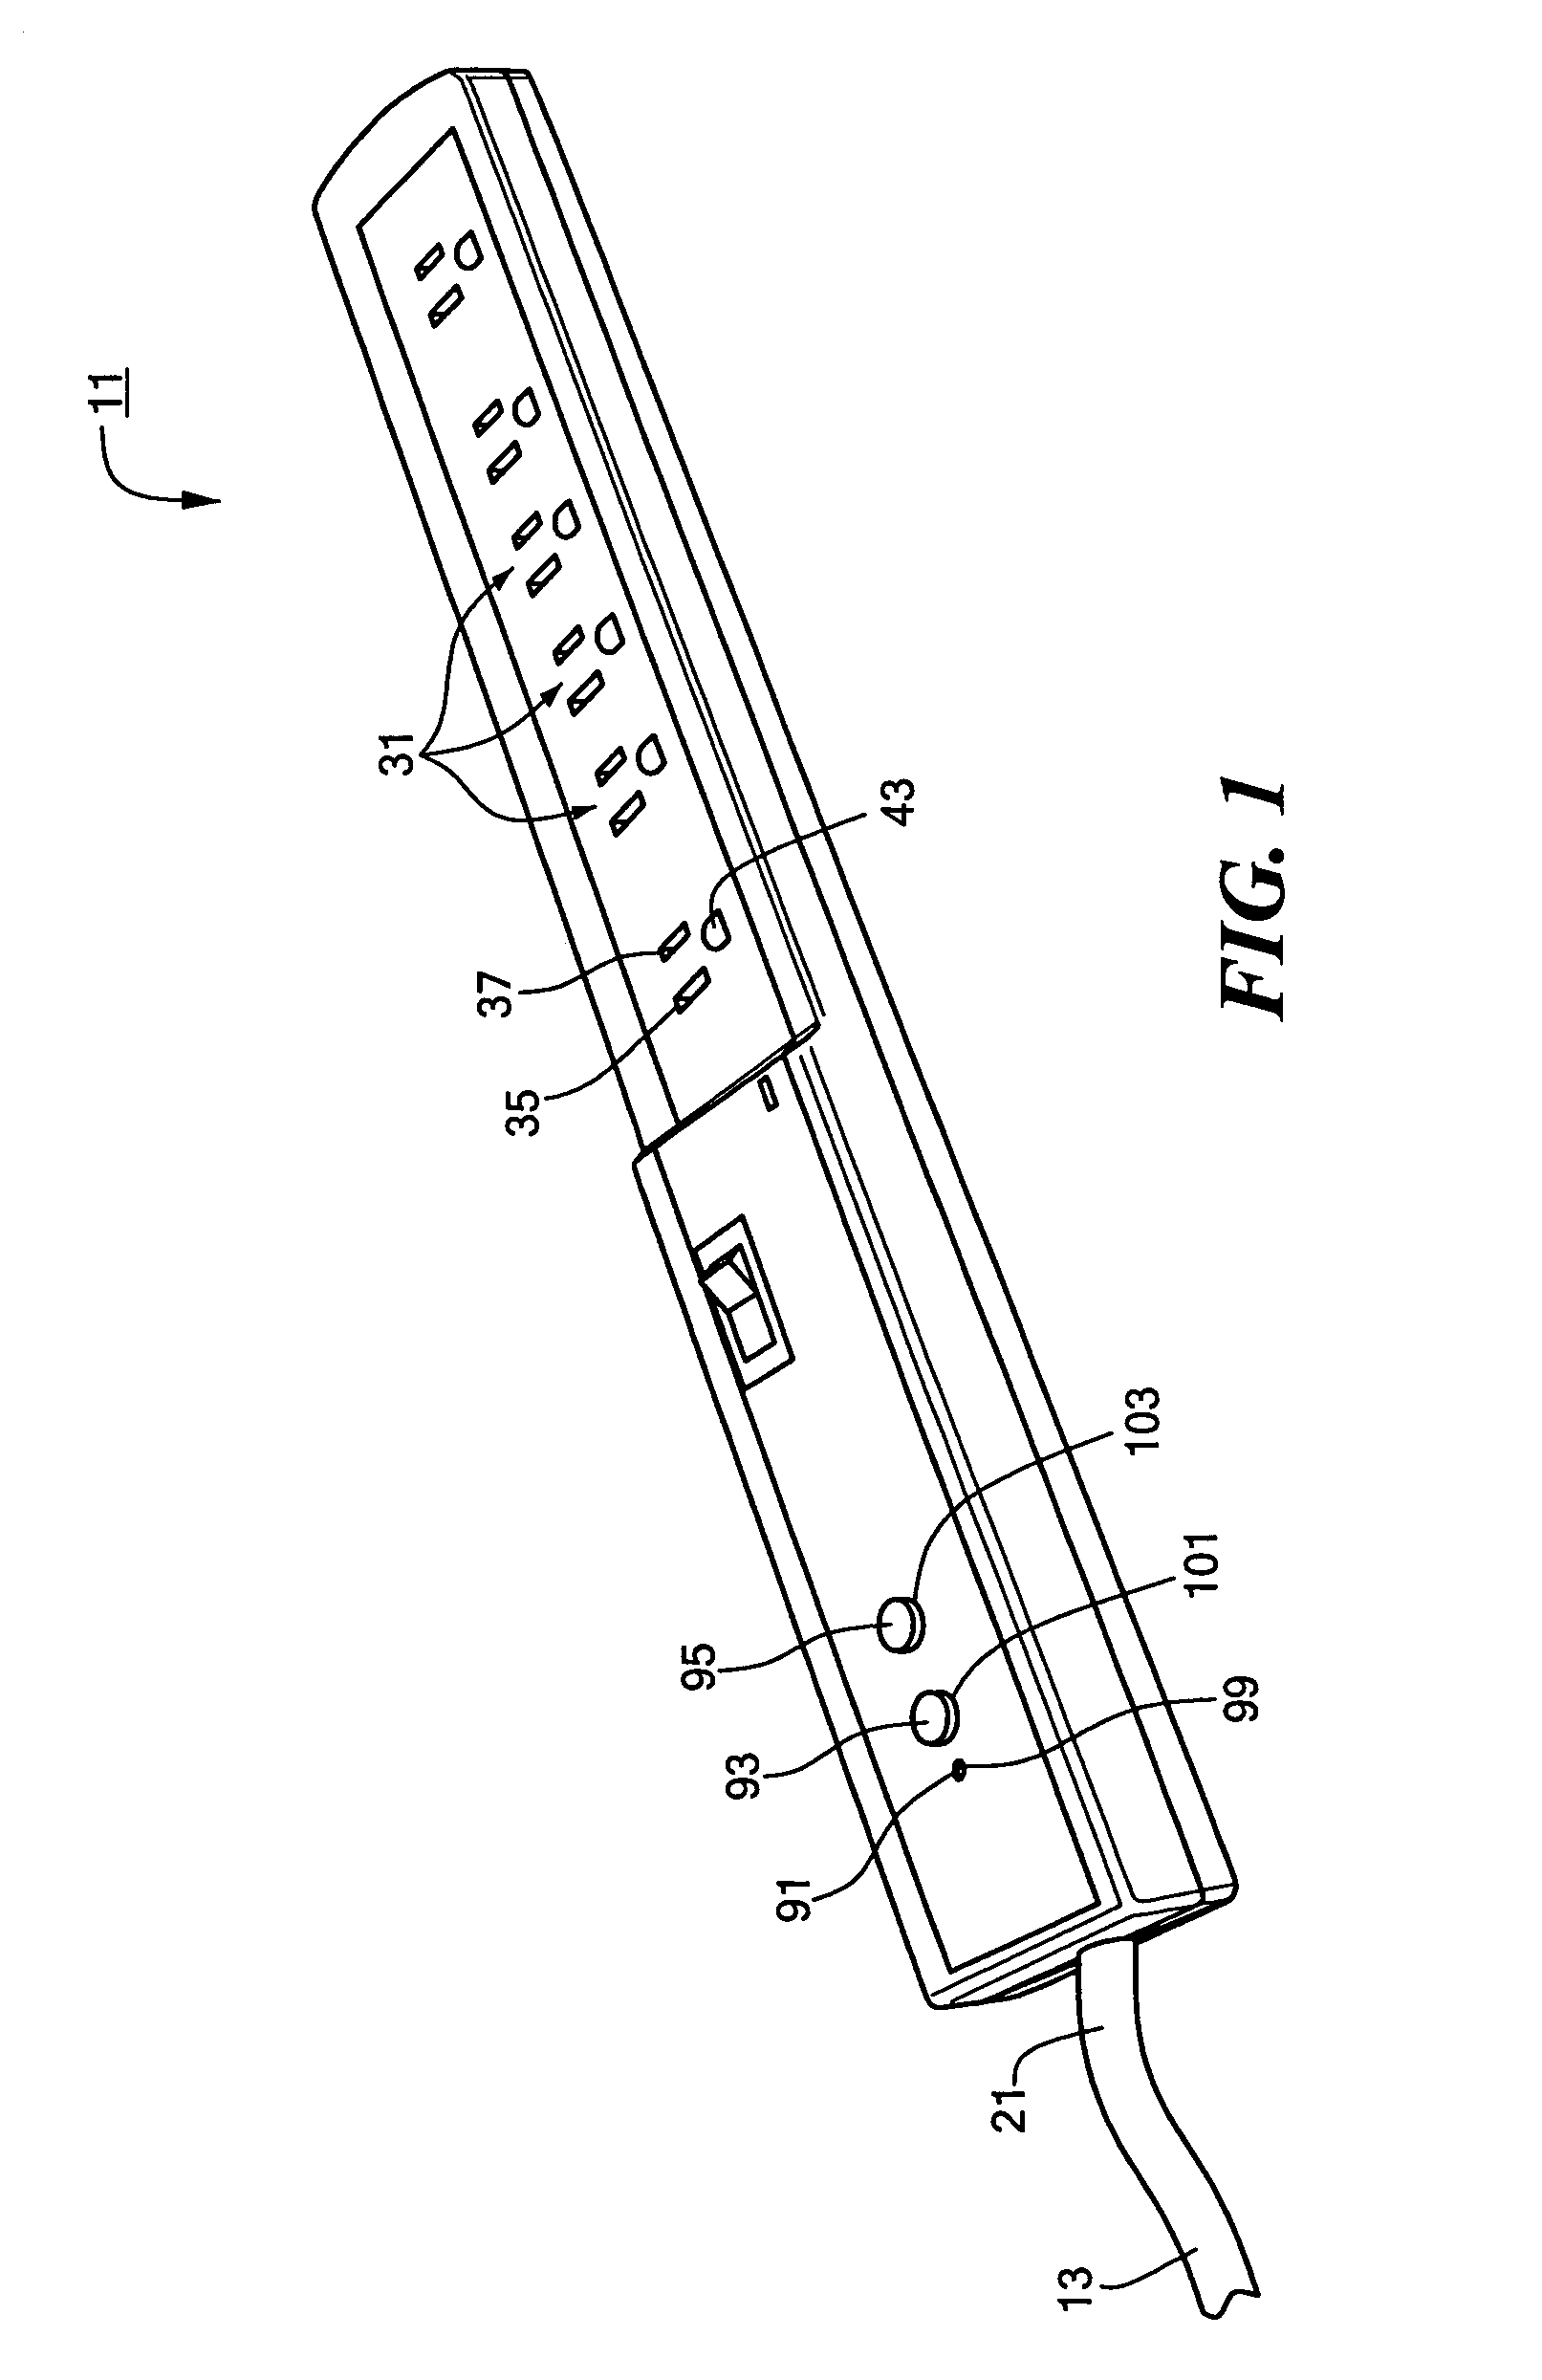 Power strip with self-contained ground fault circuit interrupter module